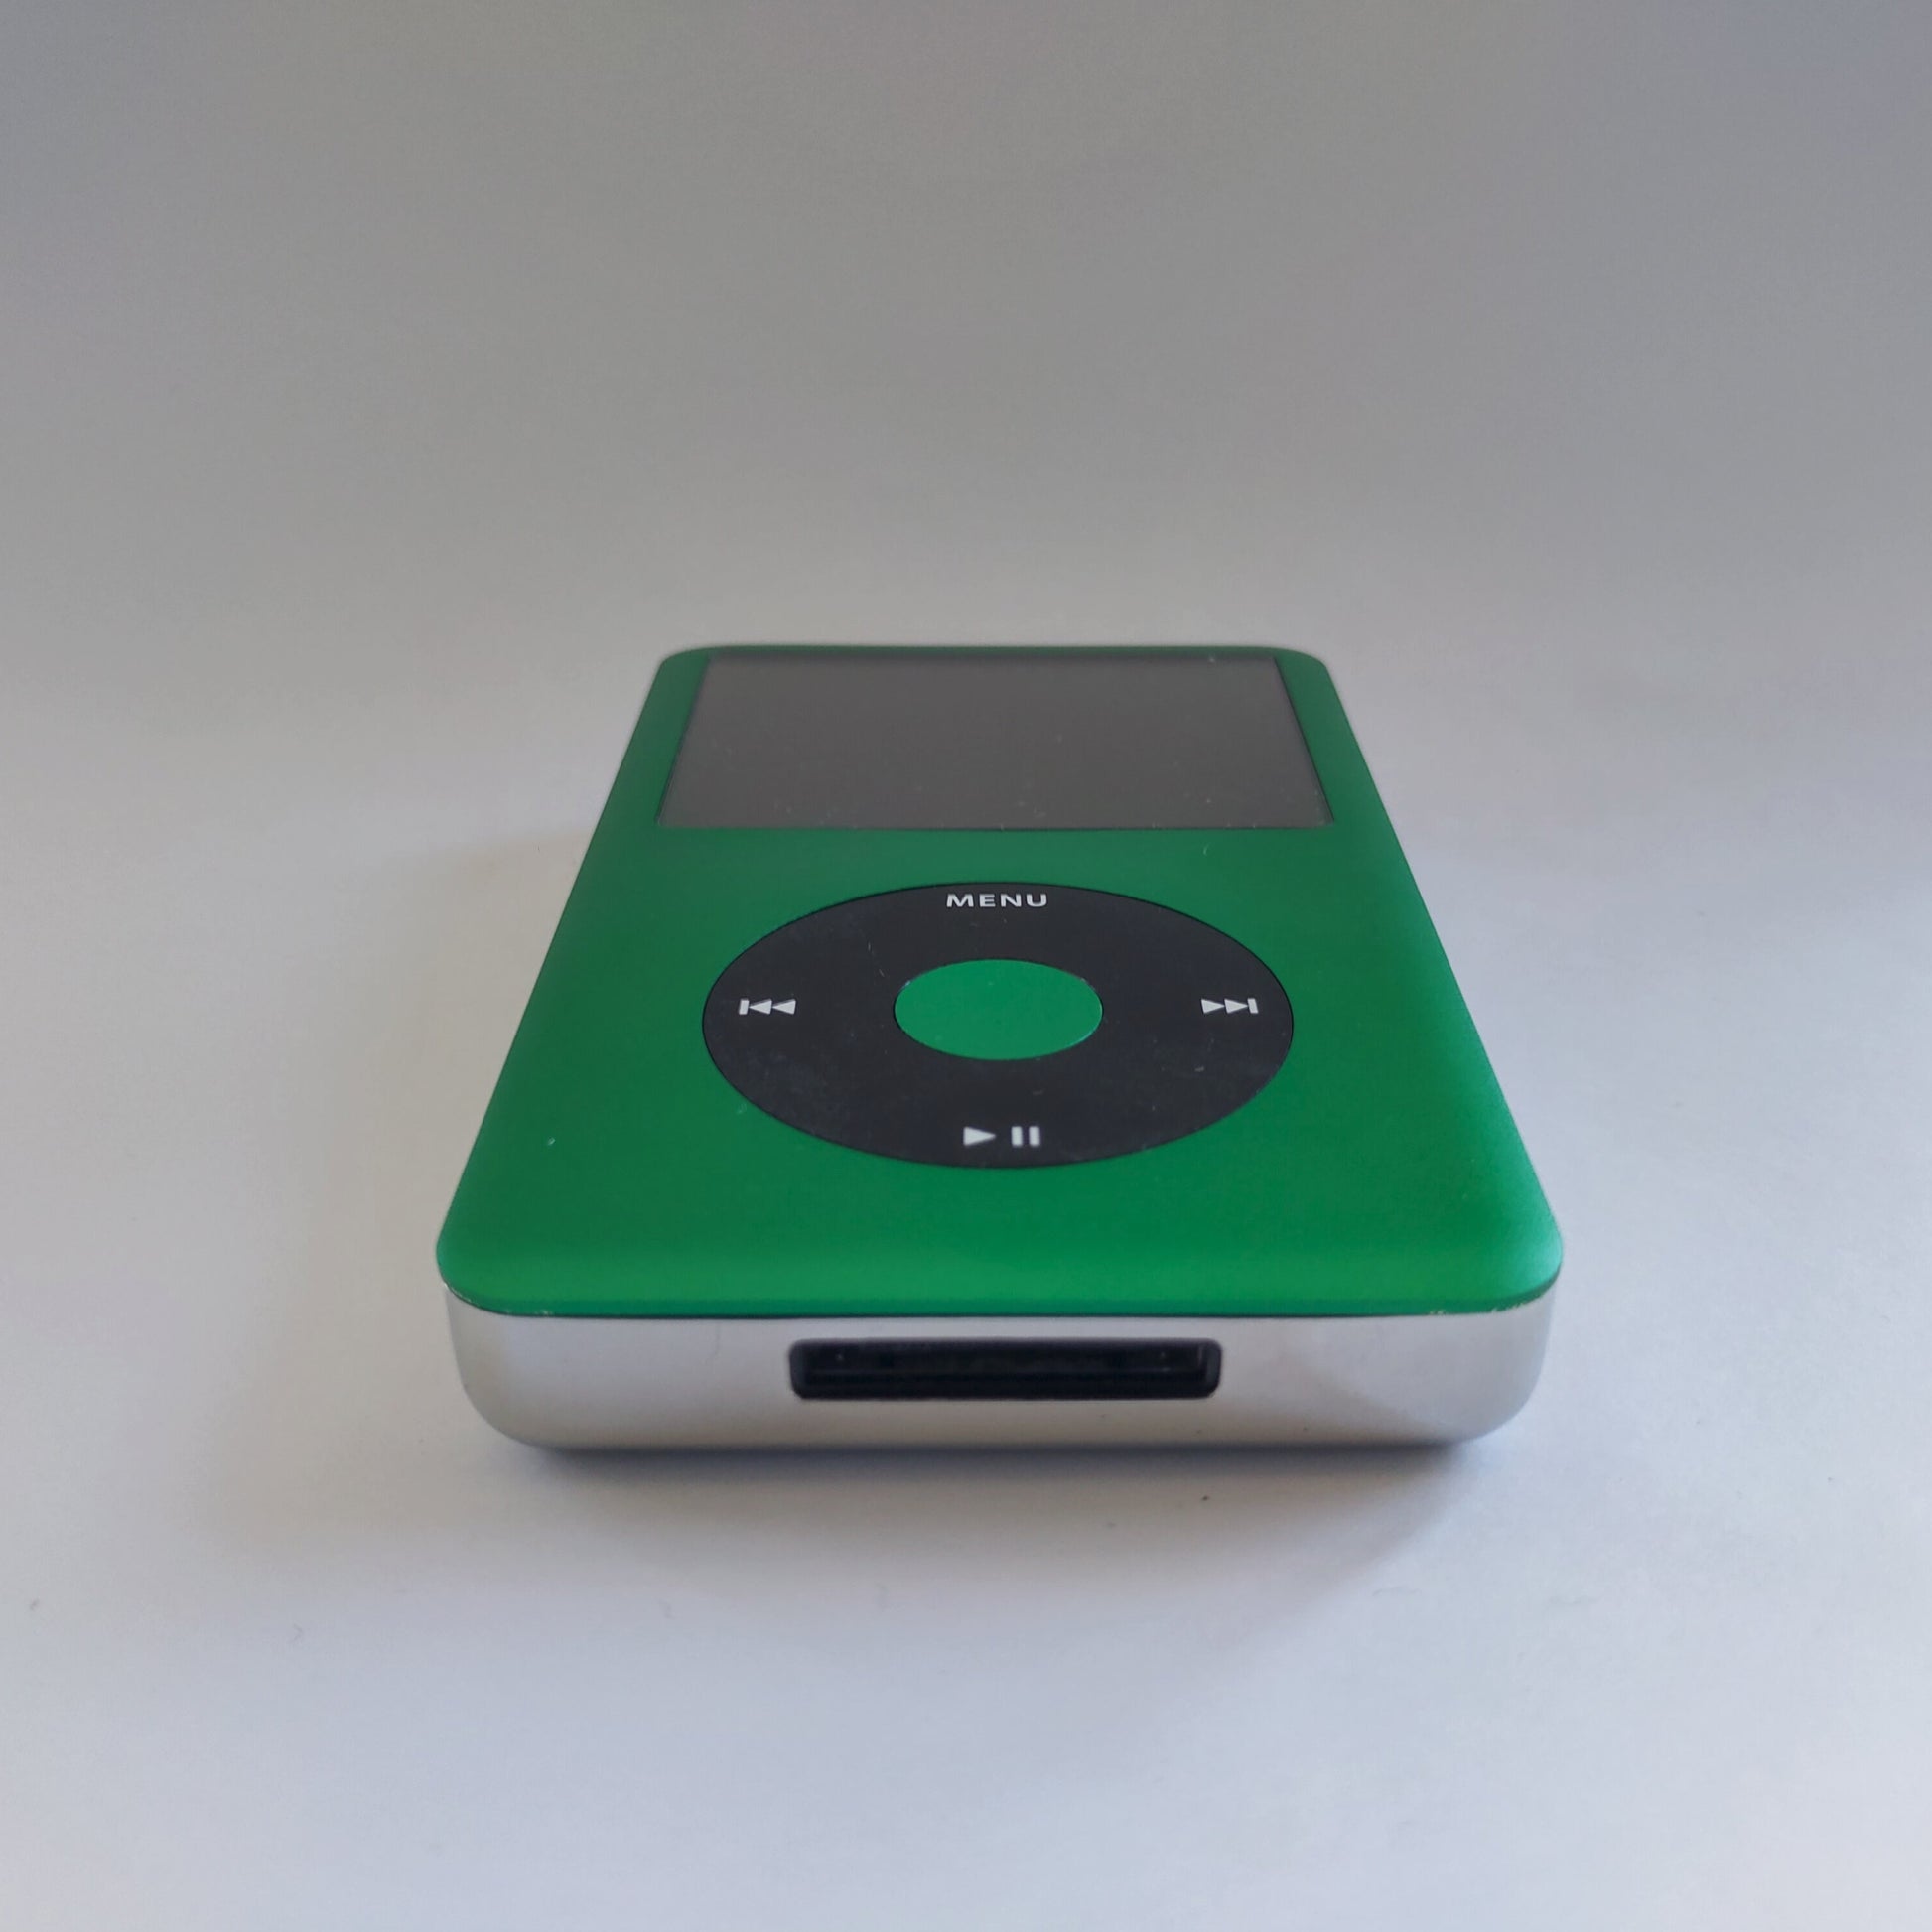 Green iPod classic front view